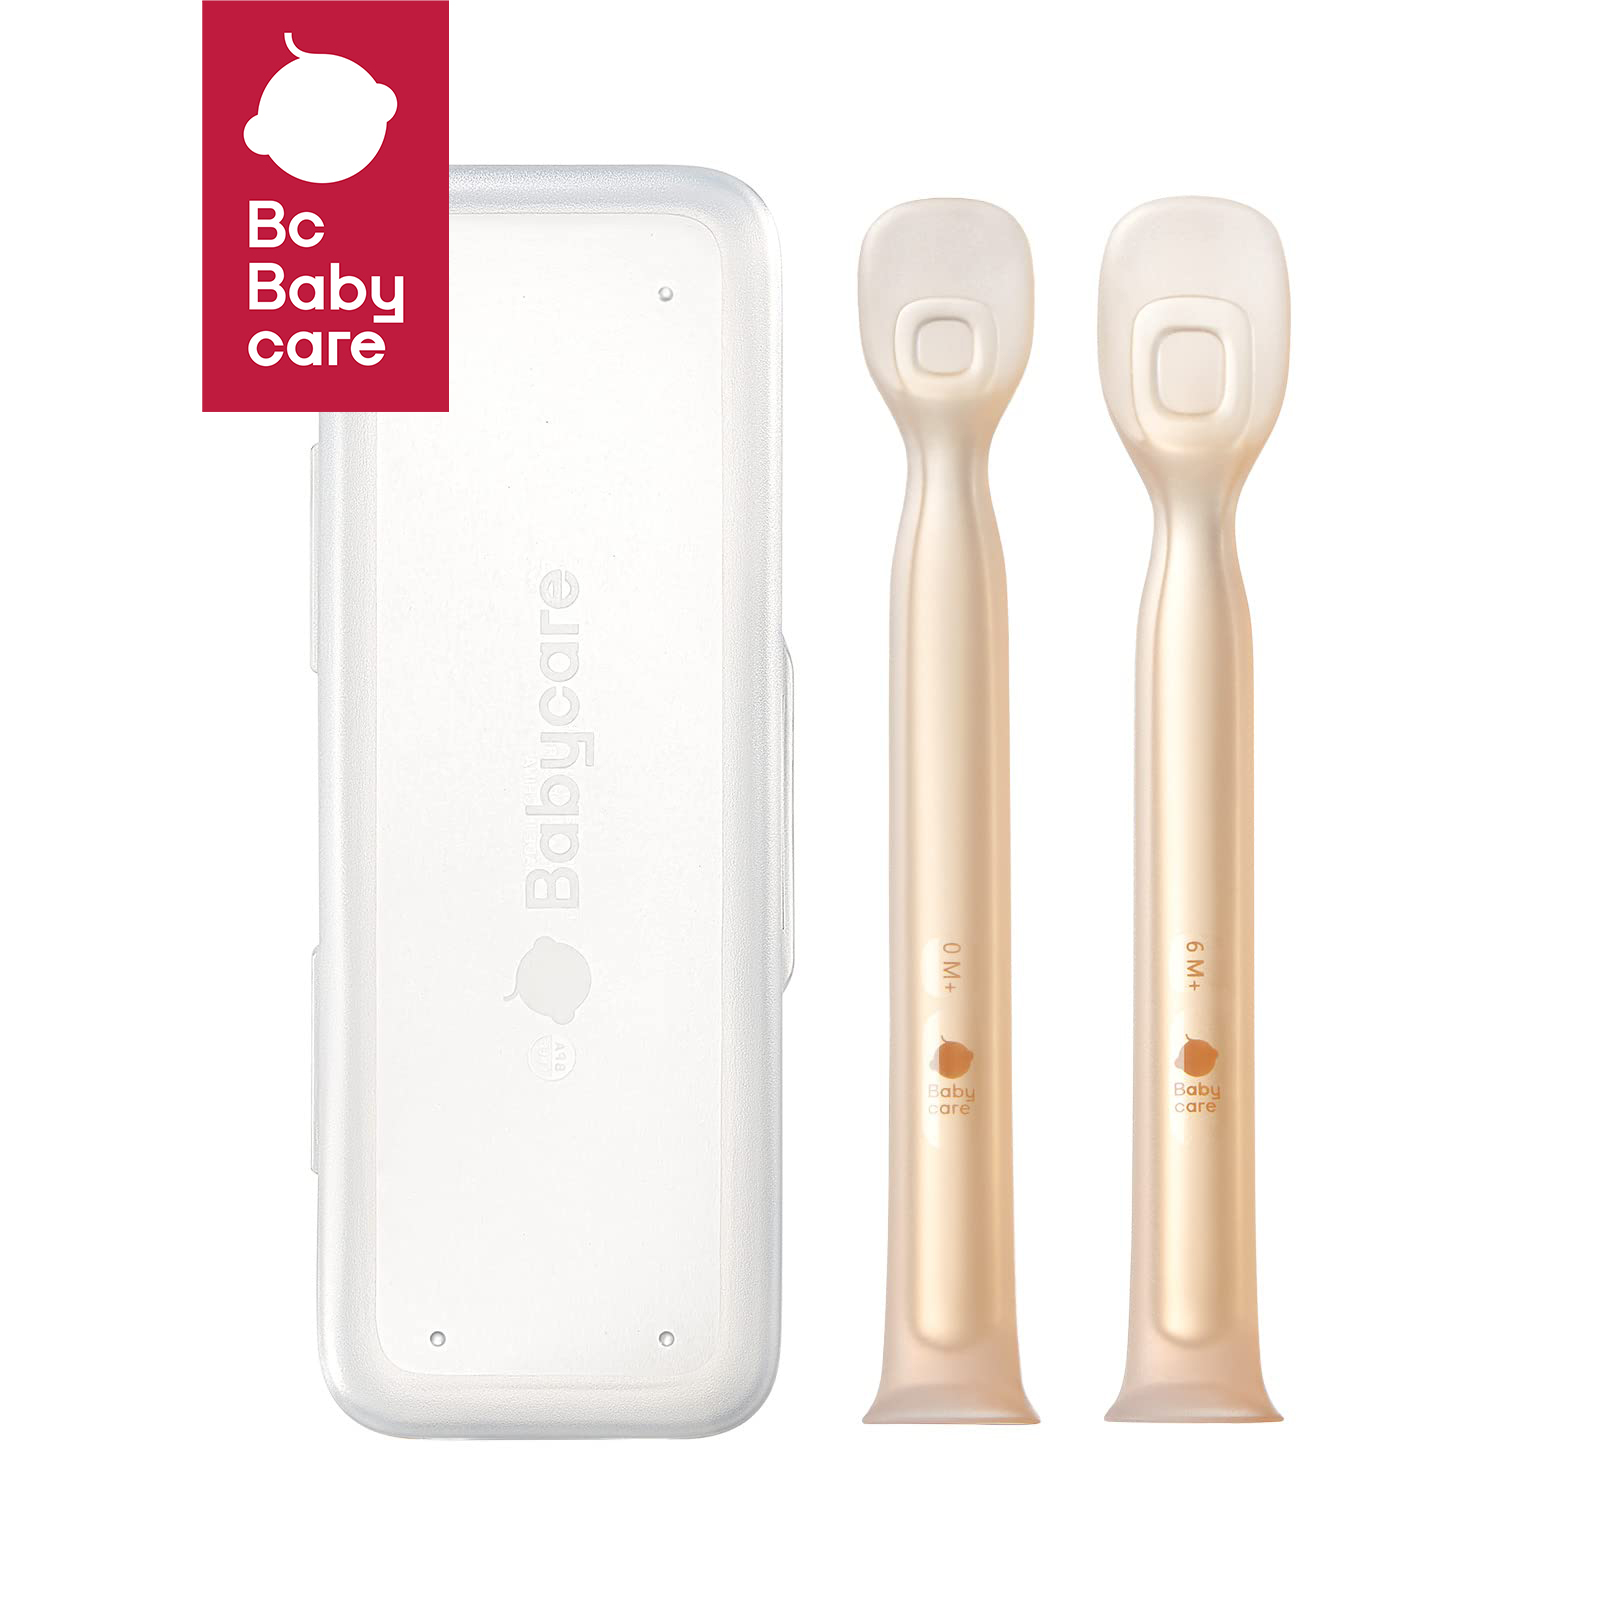 Bc Babycare Silicone Baby Feeding Spoon, First Stage Baby Spoons Soft